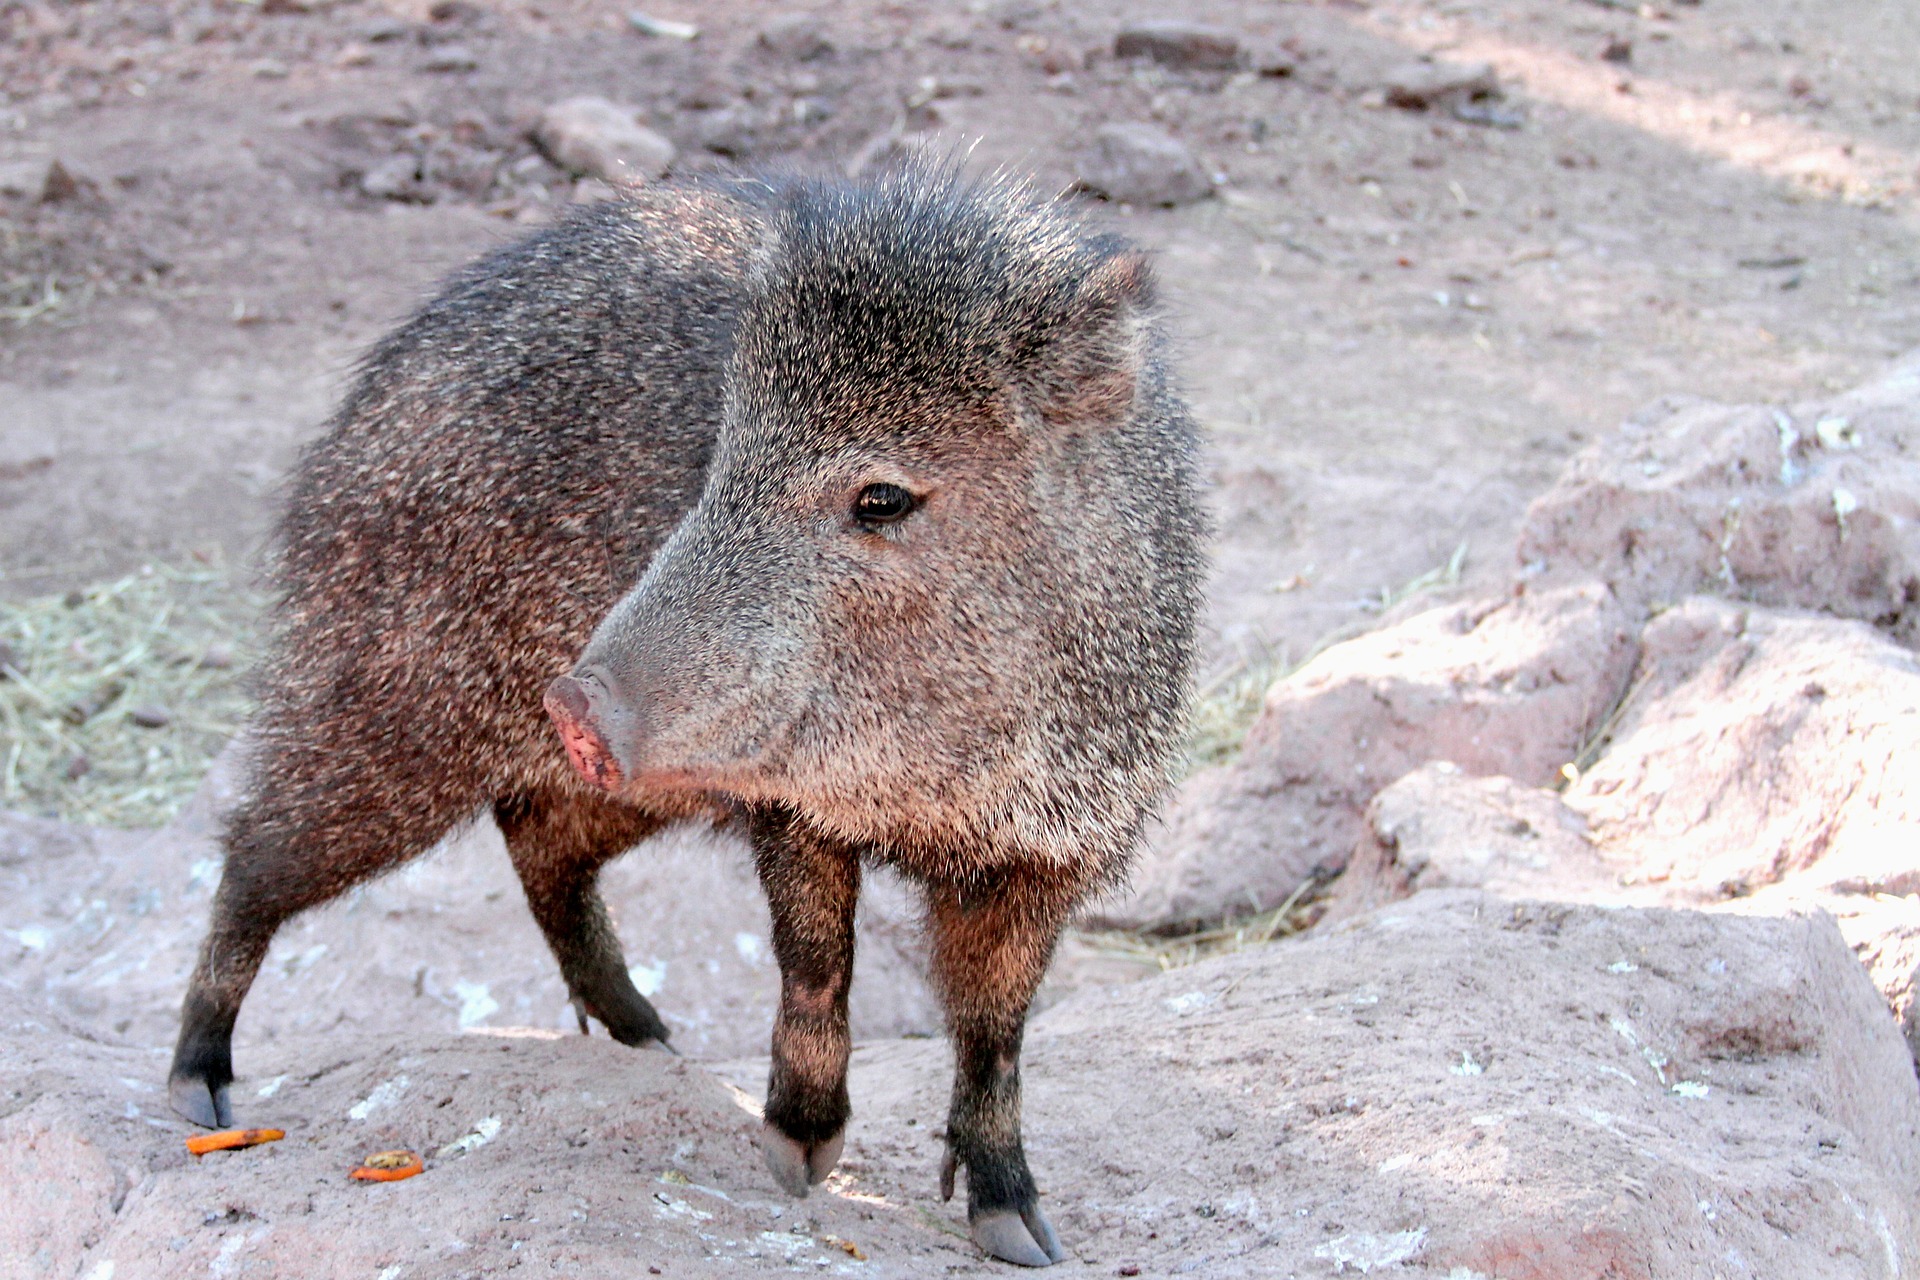 See javelina and more while Scottsdale wildlife watching